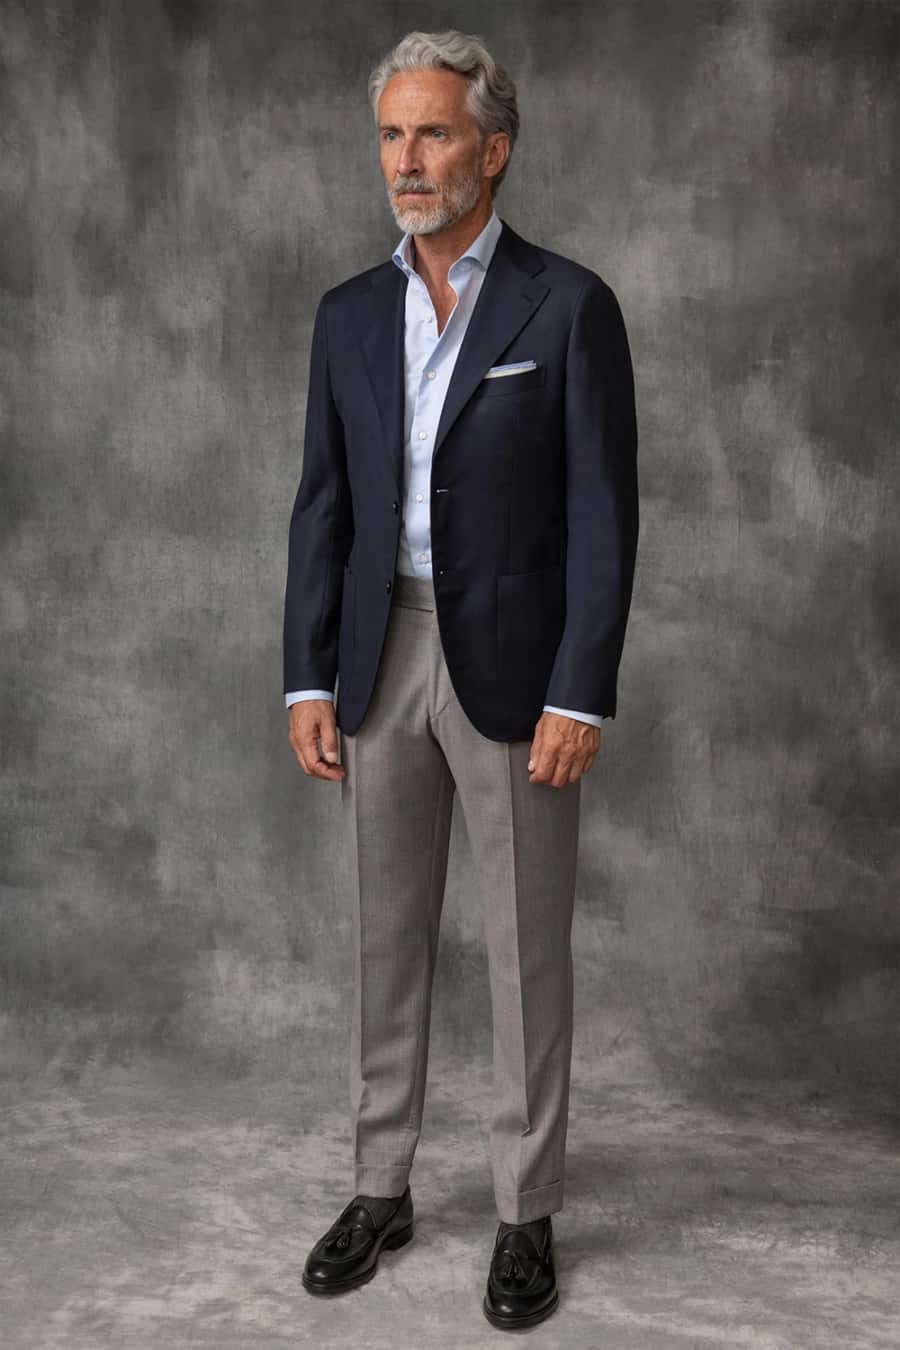 Men's grey dress pants, white shirt, navy blazer and black leather loafers outfit